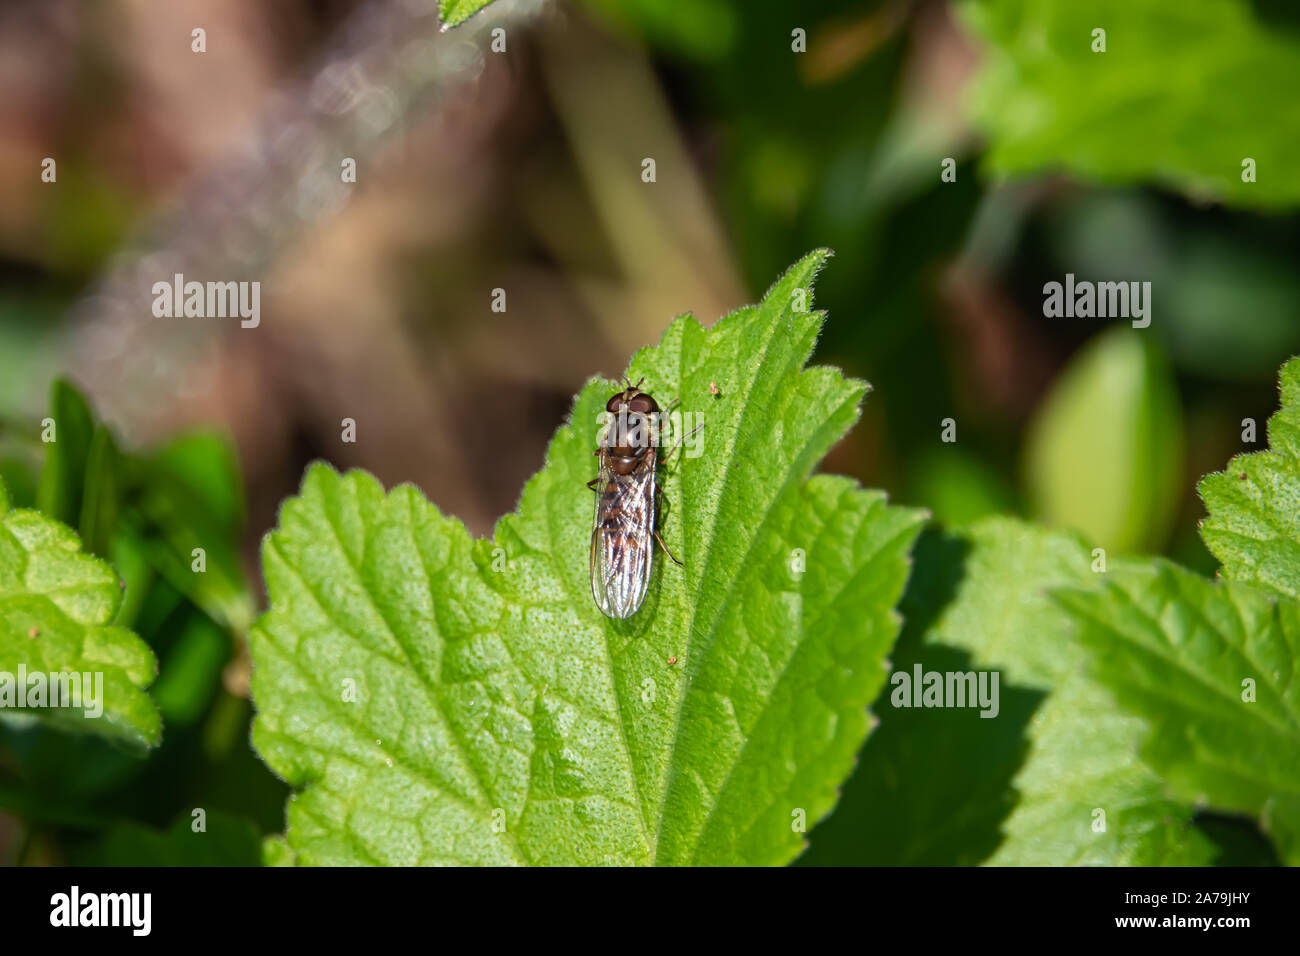 Marmalade Hoverfly on Leaf in Springtime Stock Photo